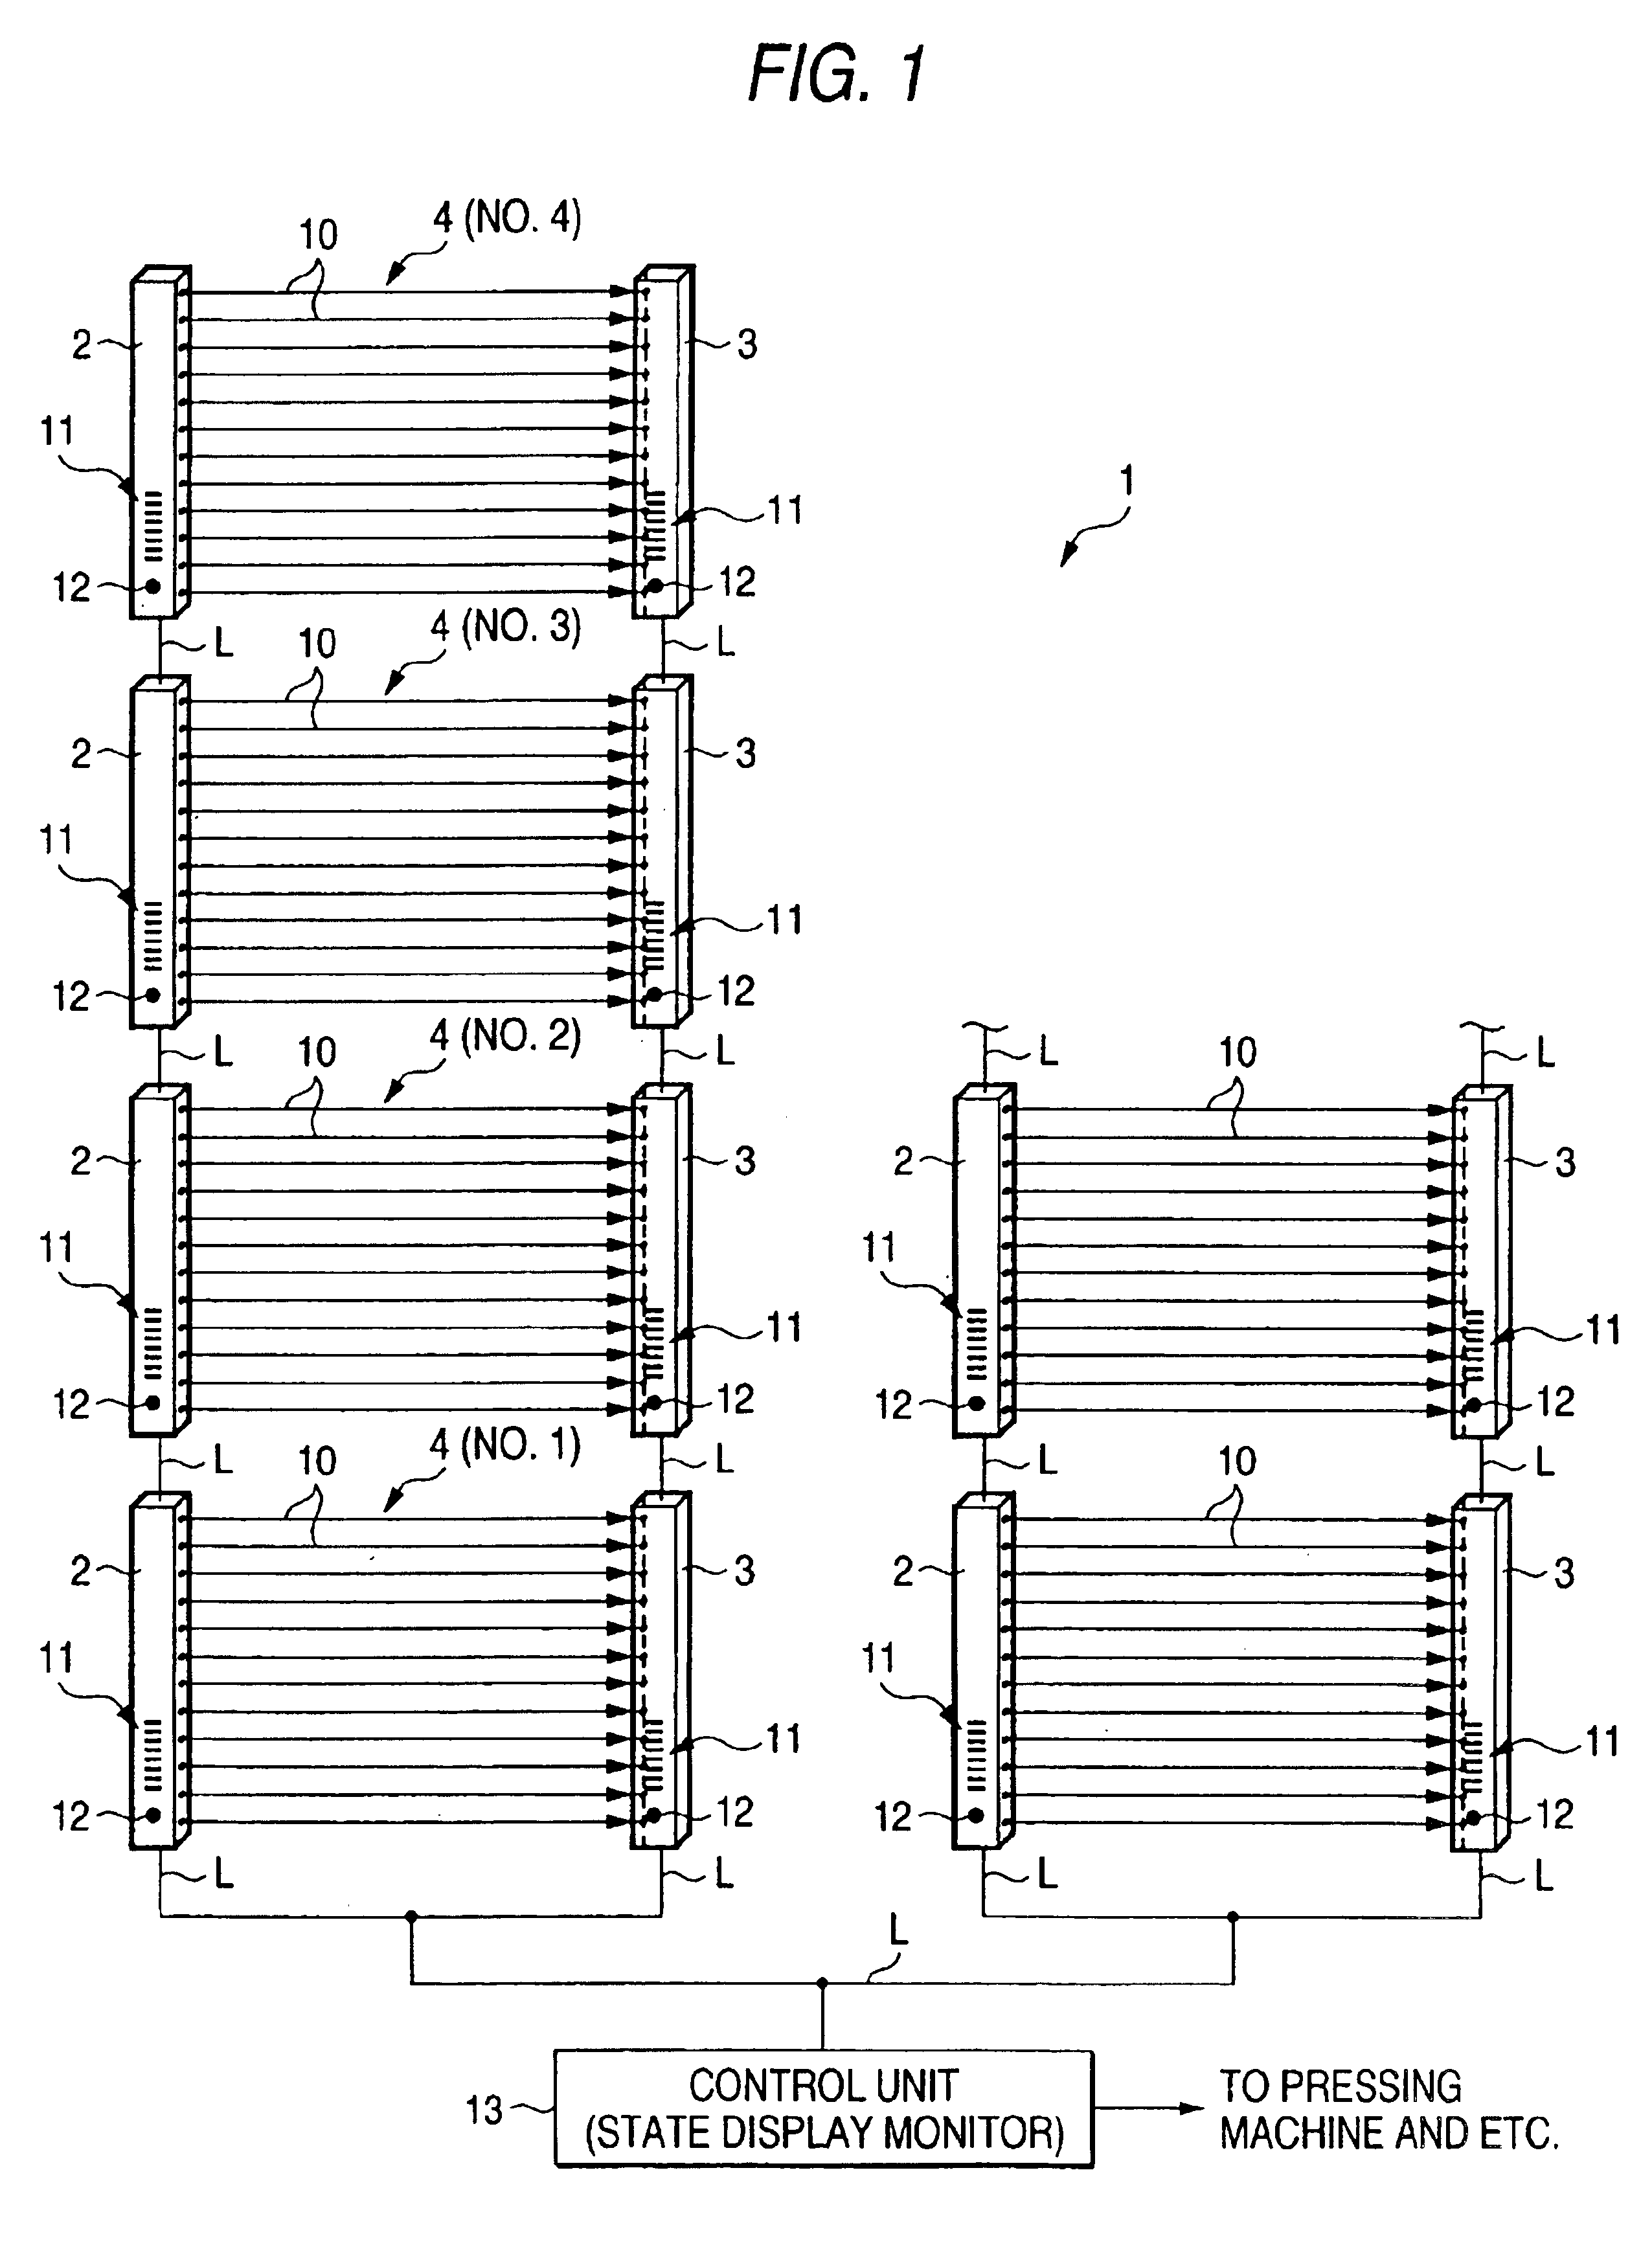 Display monitor for multi-optical-path photoelectric safety apparatus and multi-optical-path photoelectric safety apparatus including a display monitor